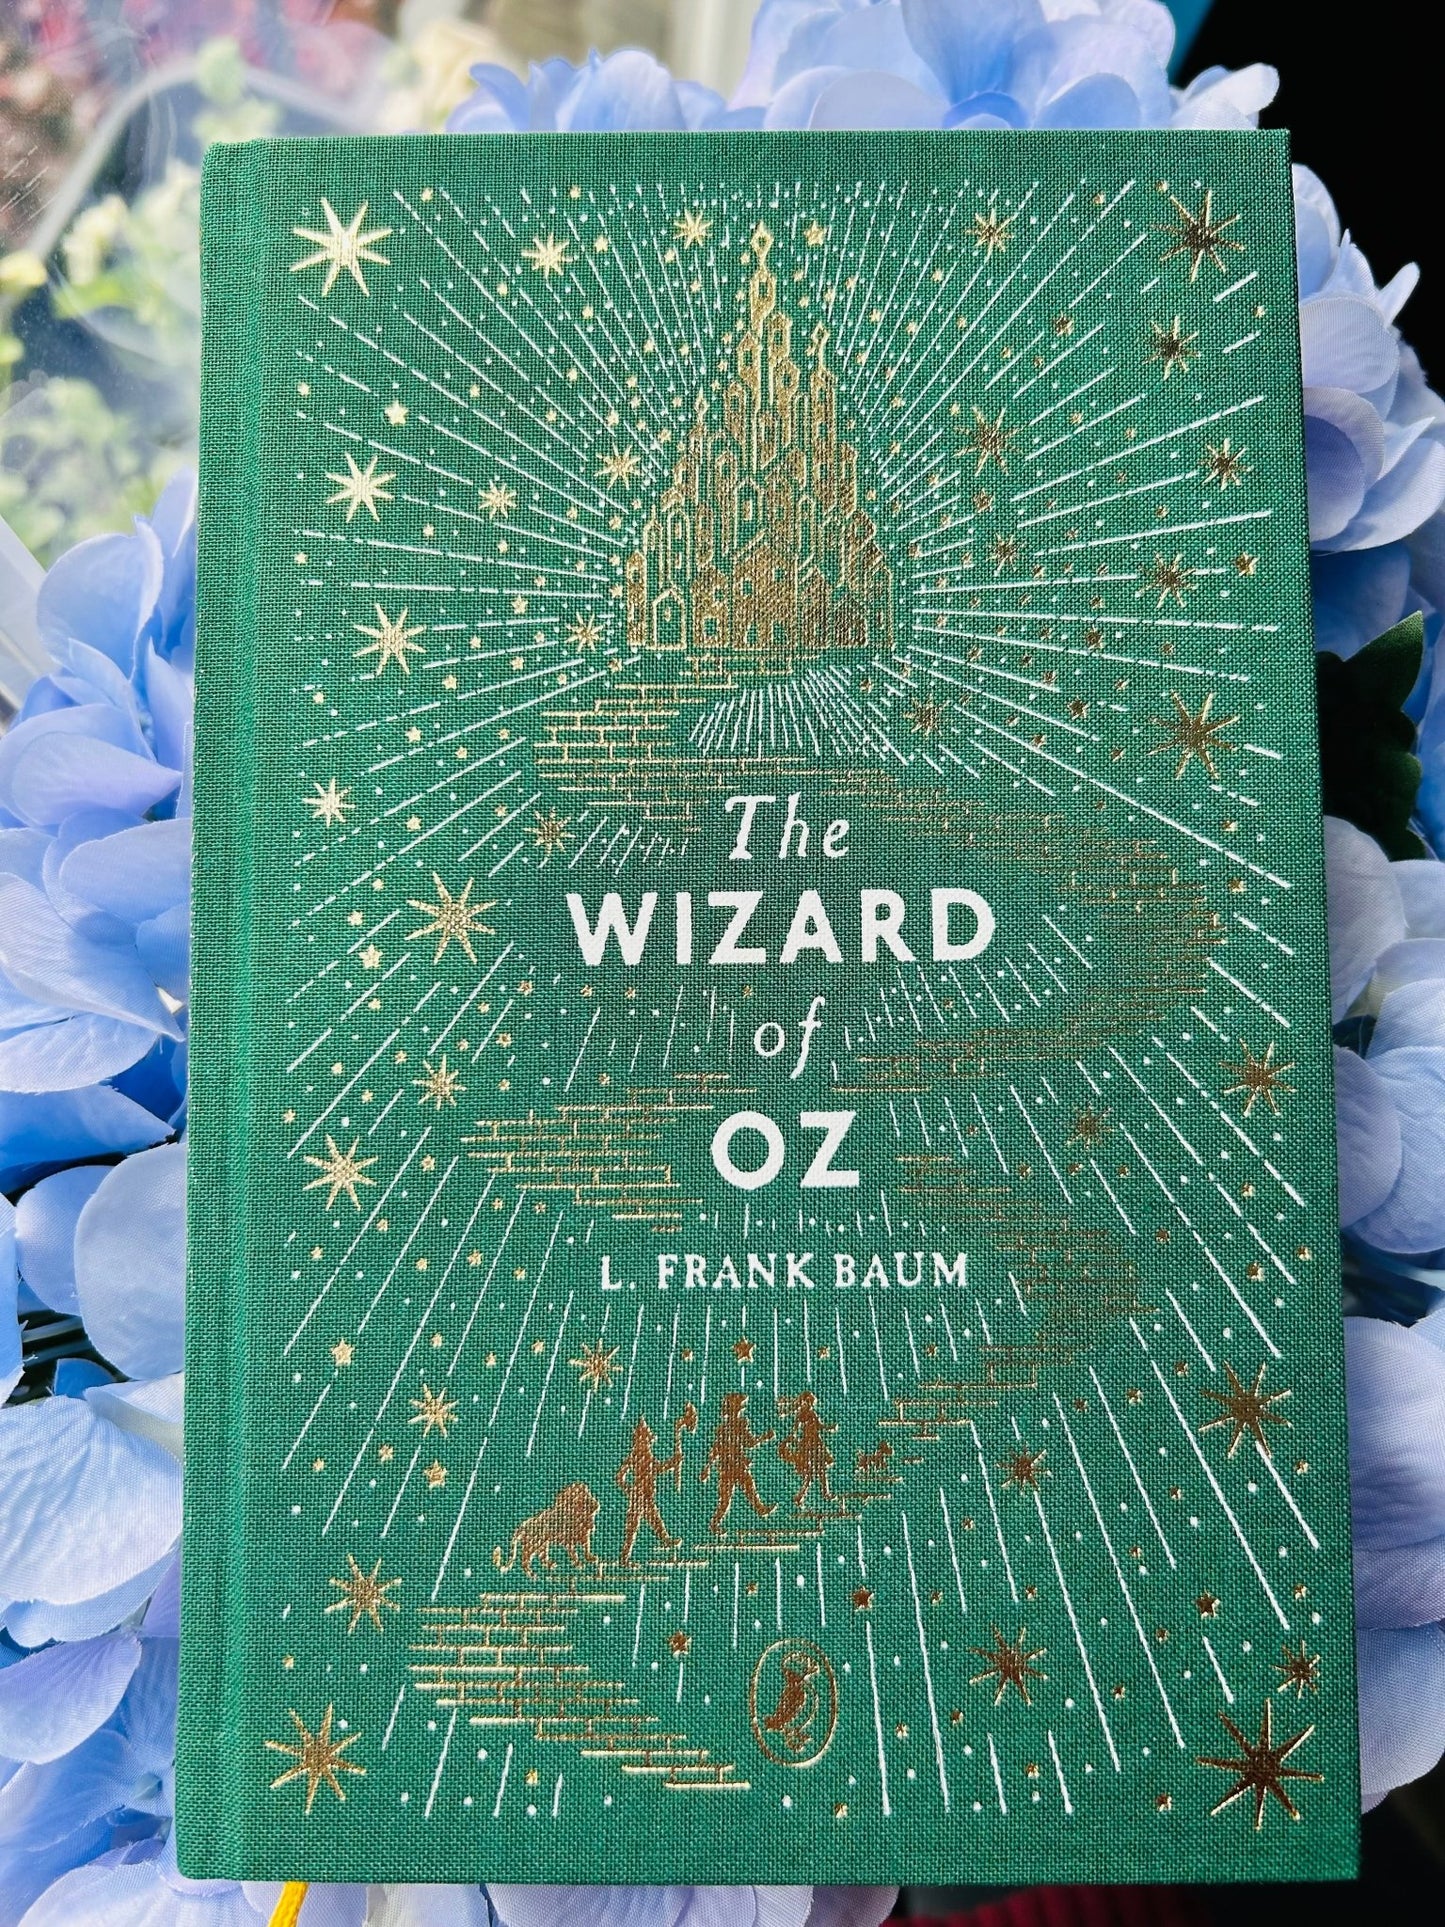 The Wizard of Oz by L Frank Baum - Puffin Clothbound Classics Edition - Looking Glass Books -